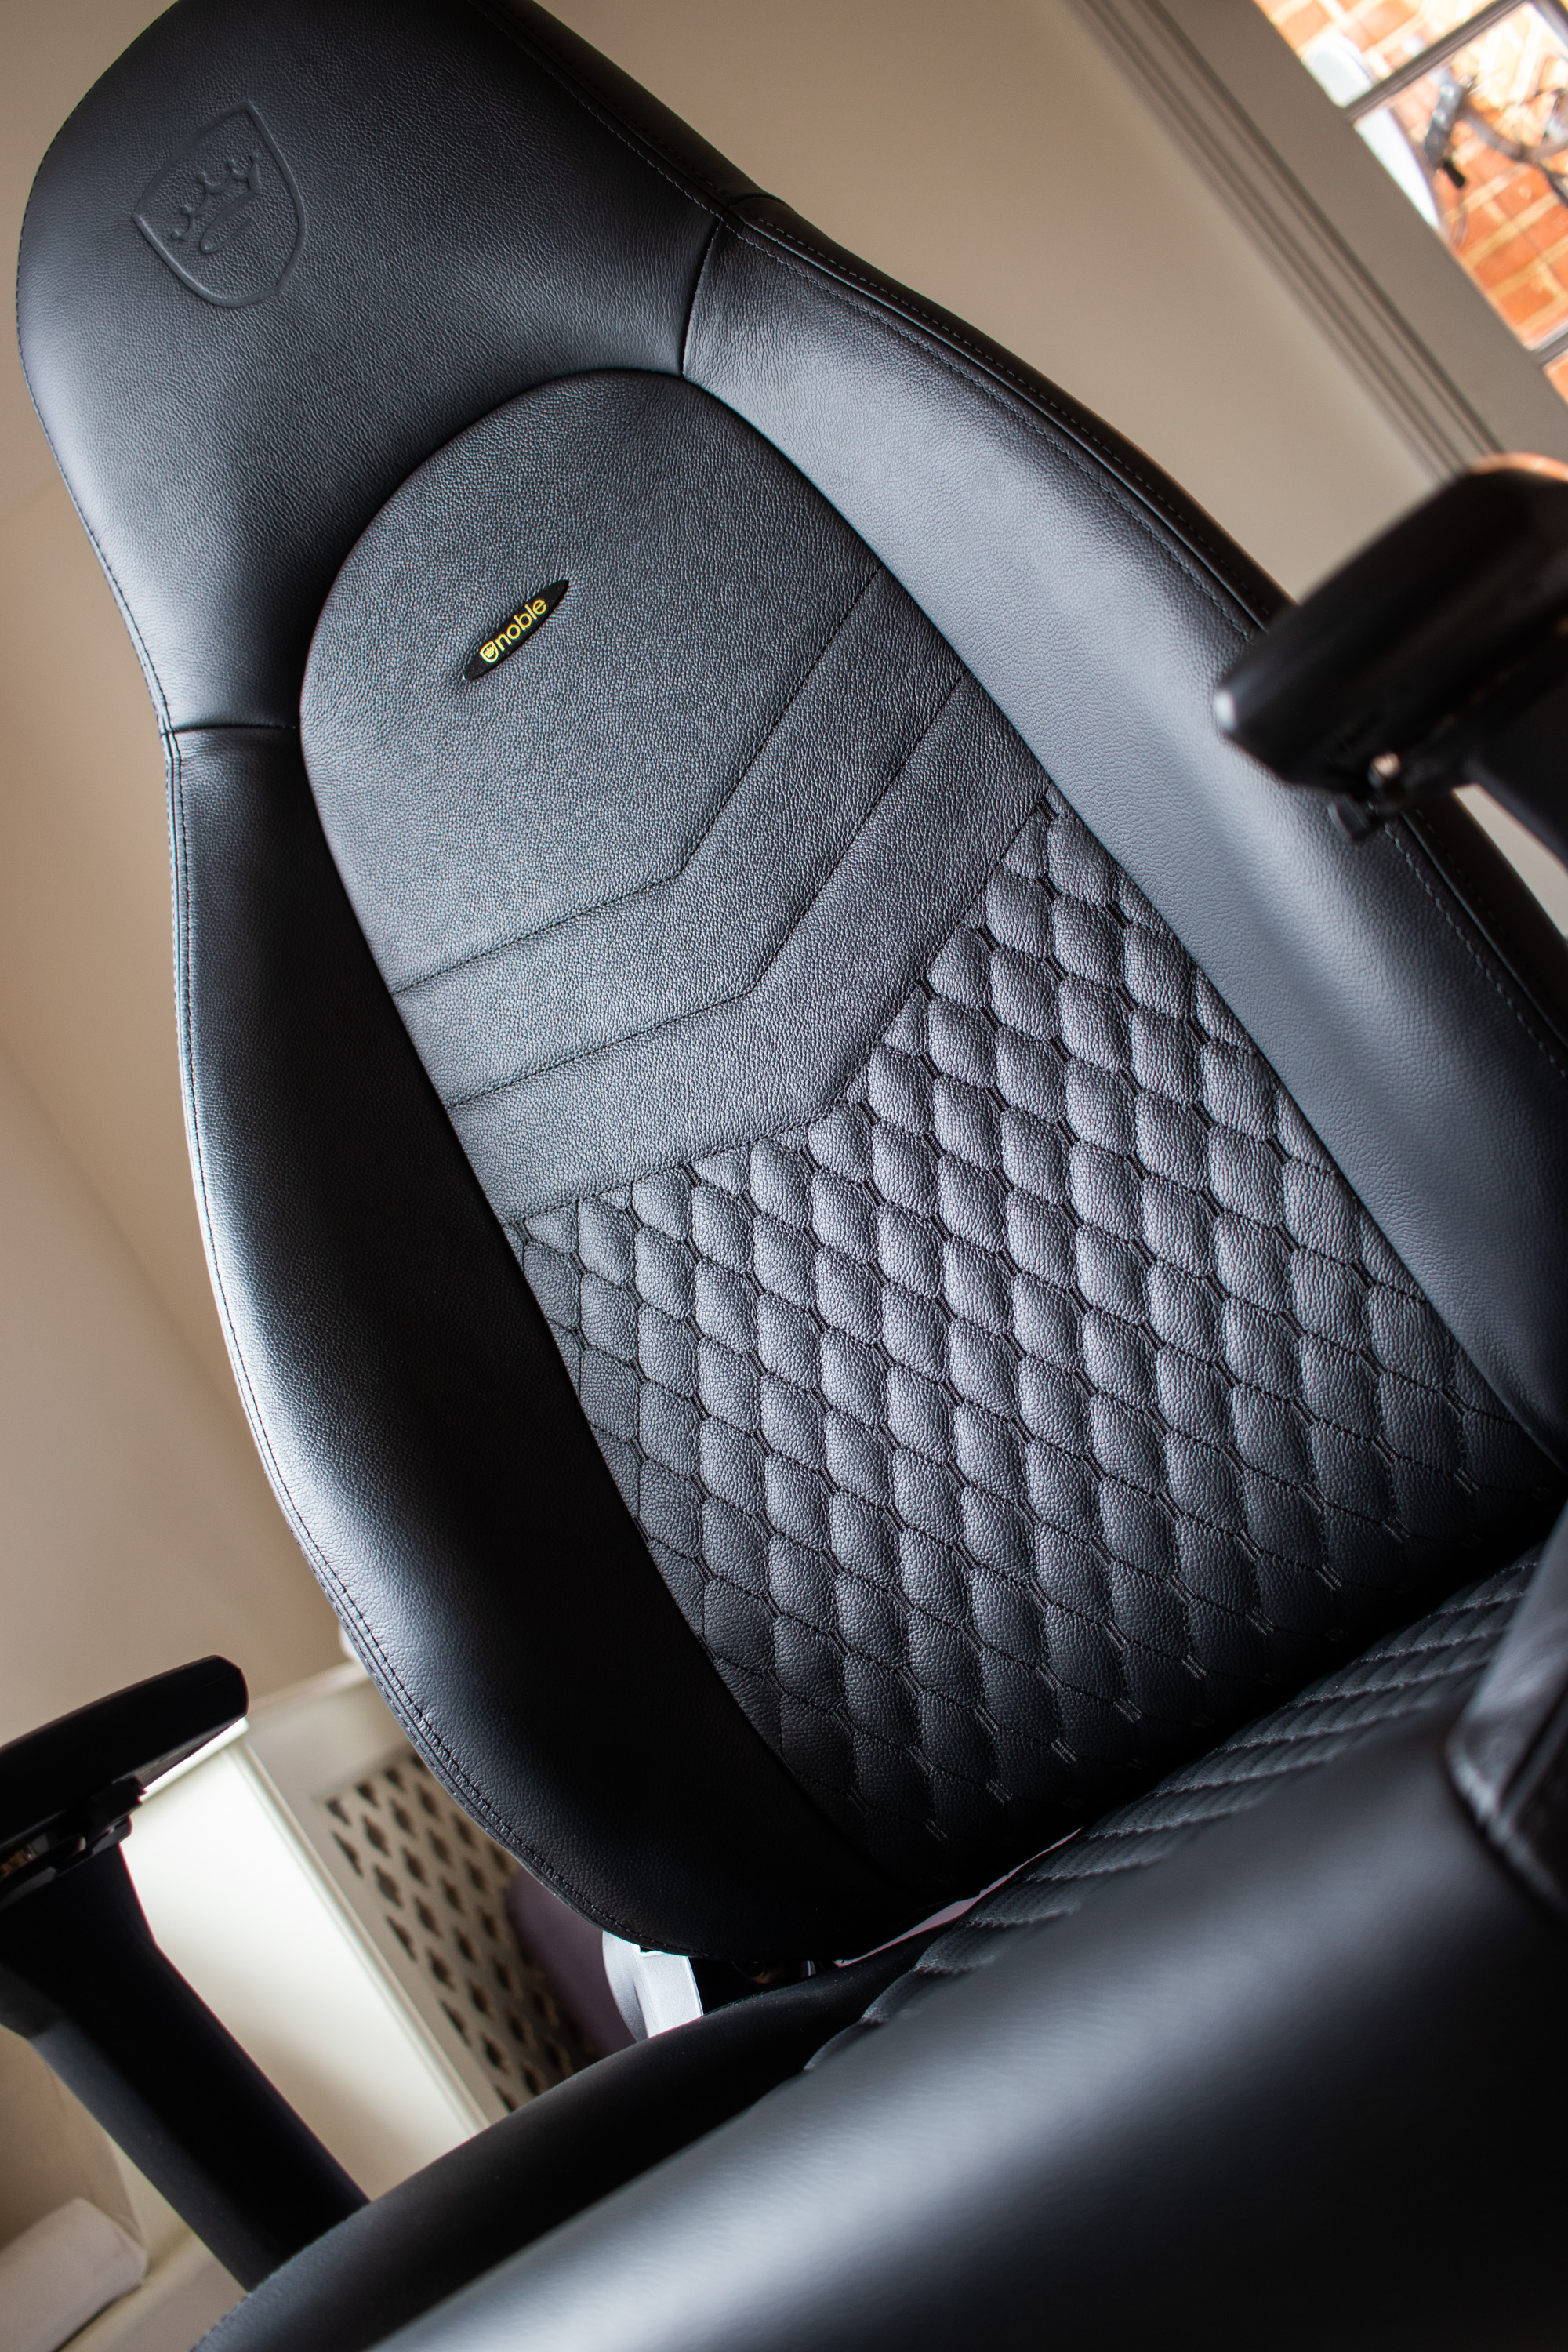 honest noblechairs icon gaming chair review  real leather